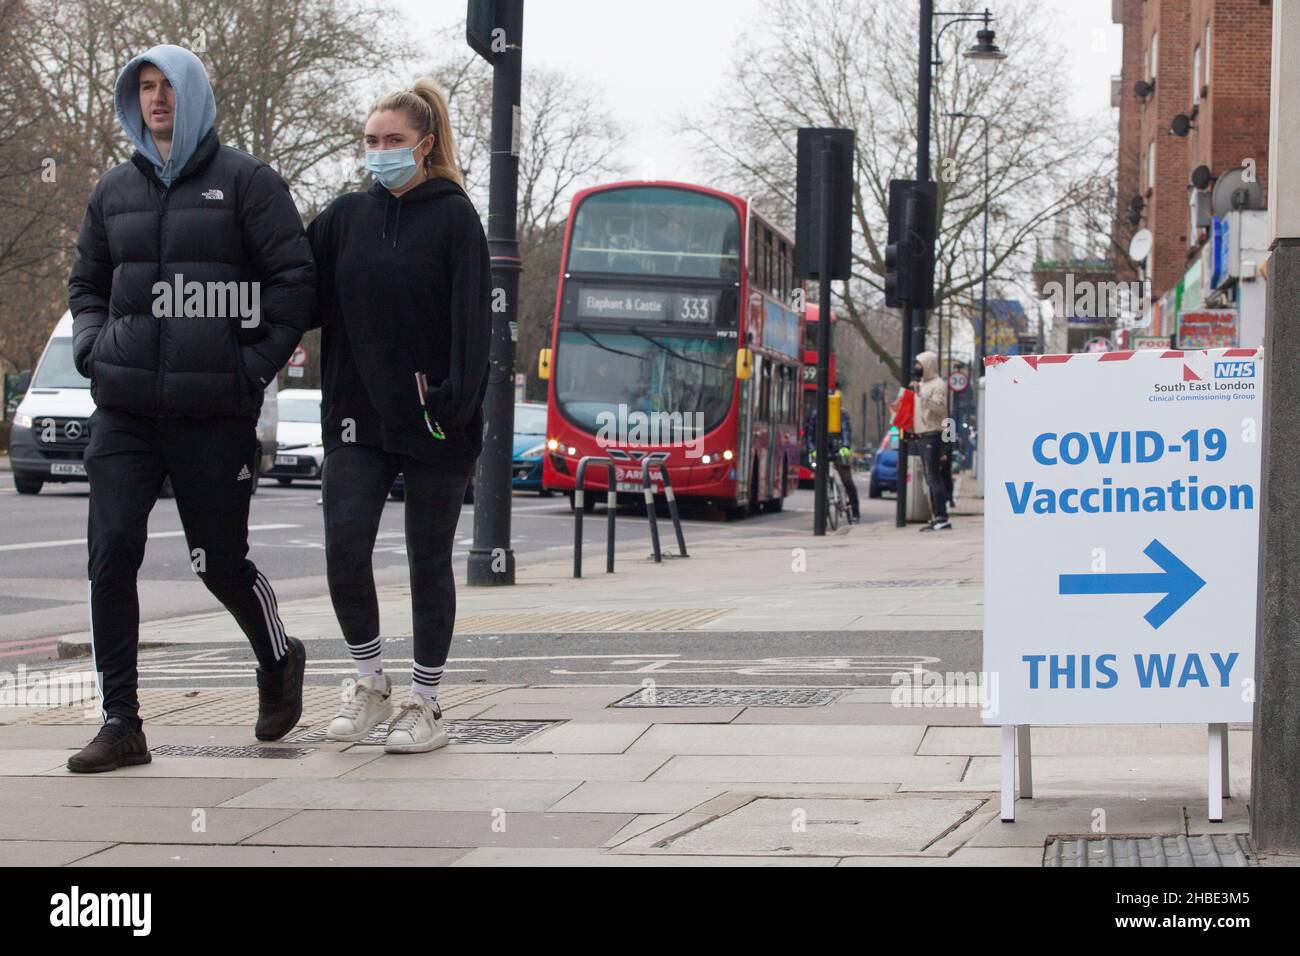 London, UK, 19 December 2021: A sign directs people to a pop-up vaccination centre at Lambeth Civic Centre in Brixton. Perhaps unaware that it is open on Sunday there were no people queuing although queues had been long earlier in the week. Anna Watson/Alamy Live News Stock Photo